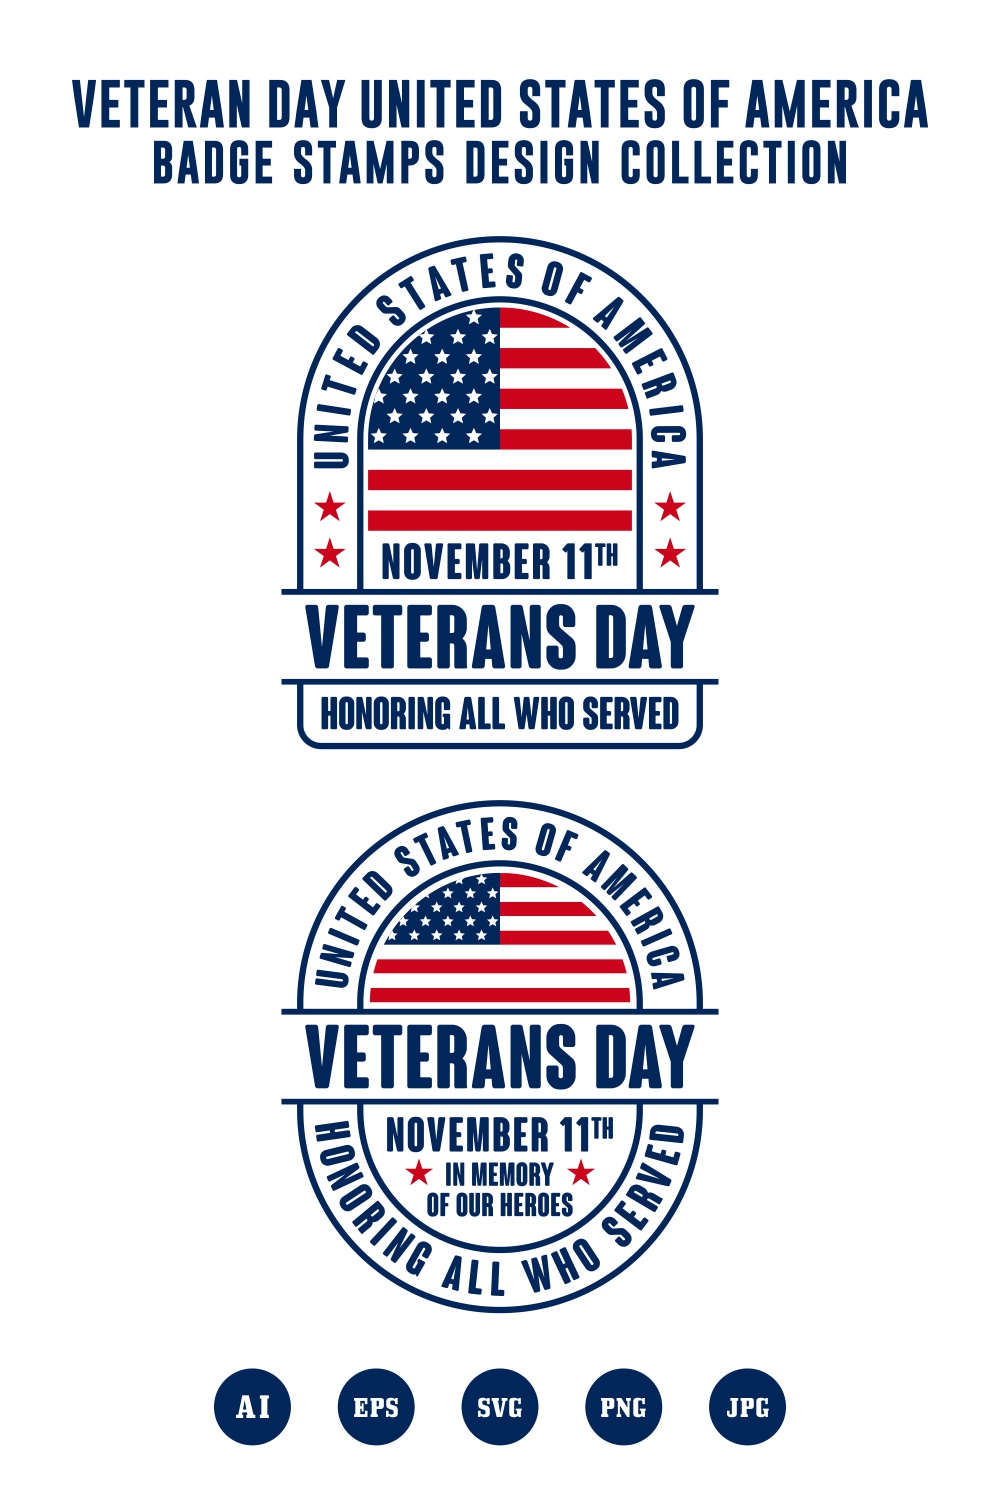 Set Veteran day united states of america badge collection - $5 pinterest preview image.